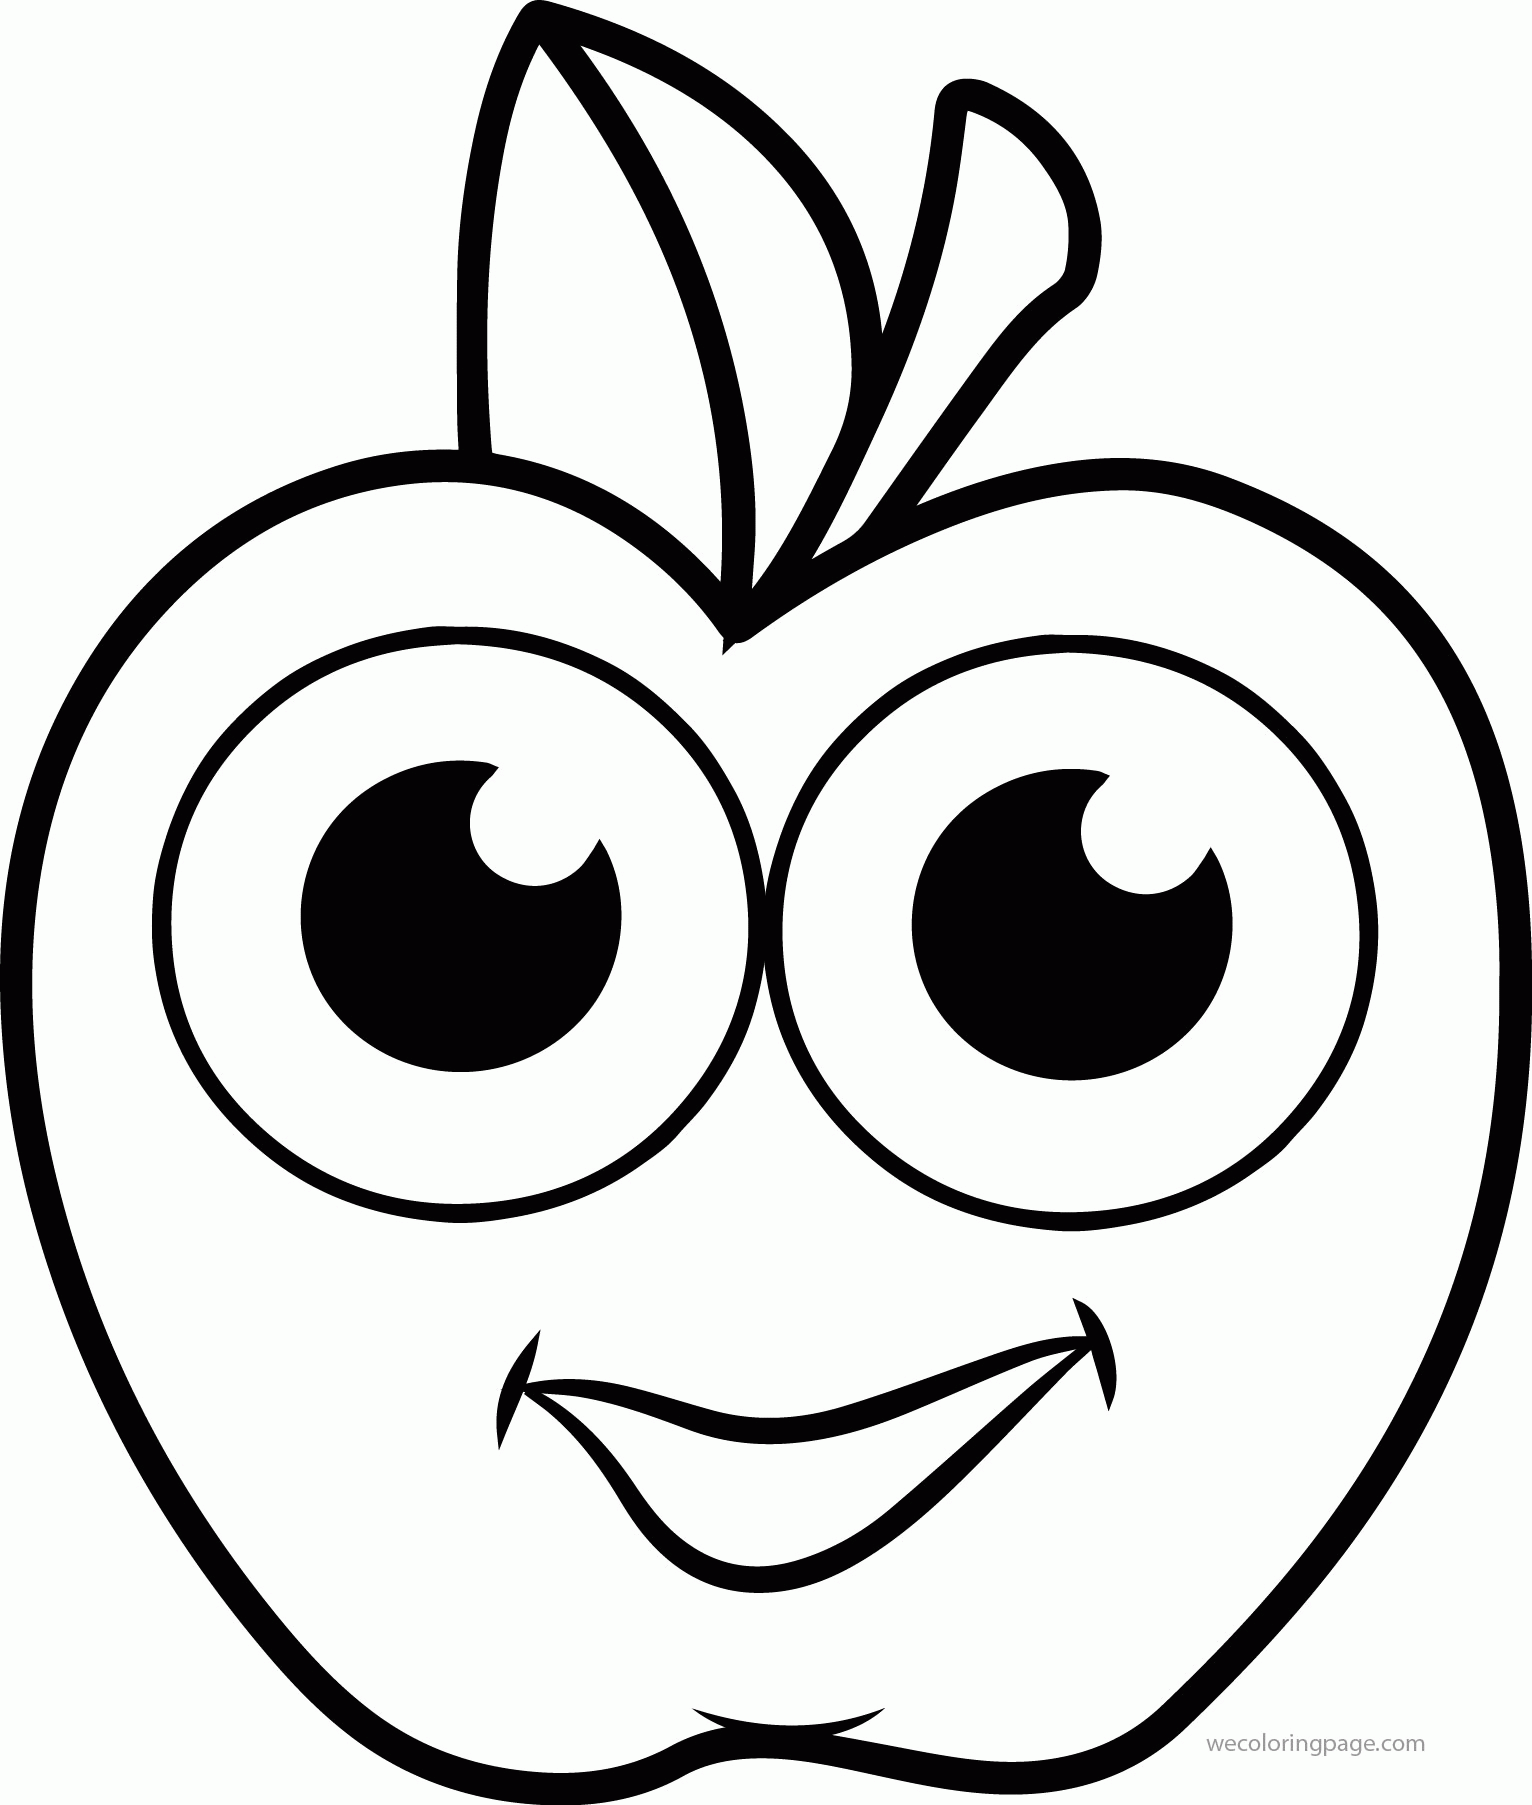 Coloring Pages Of Apple Orchard - Coloring